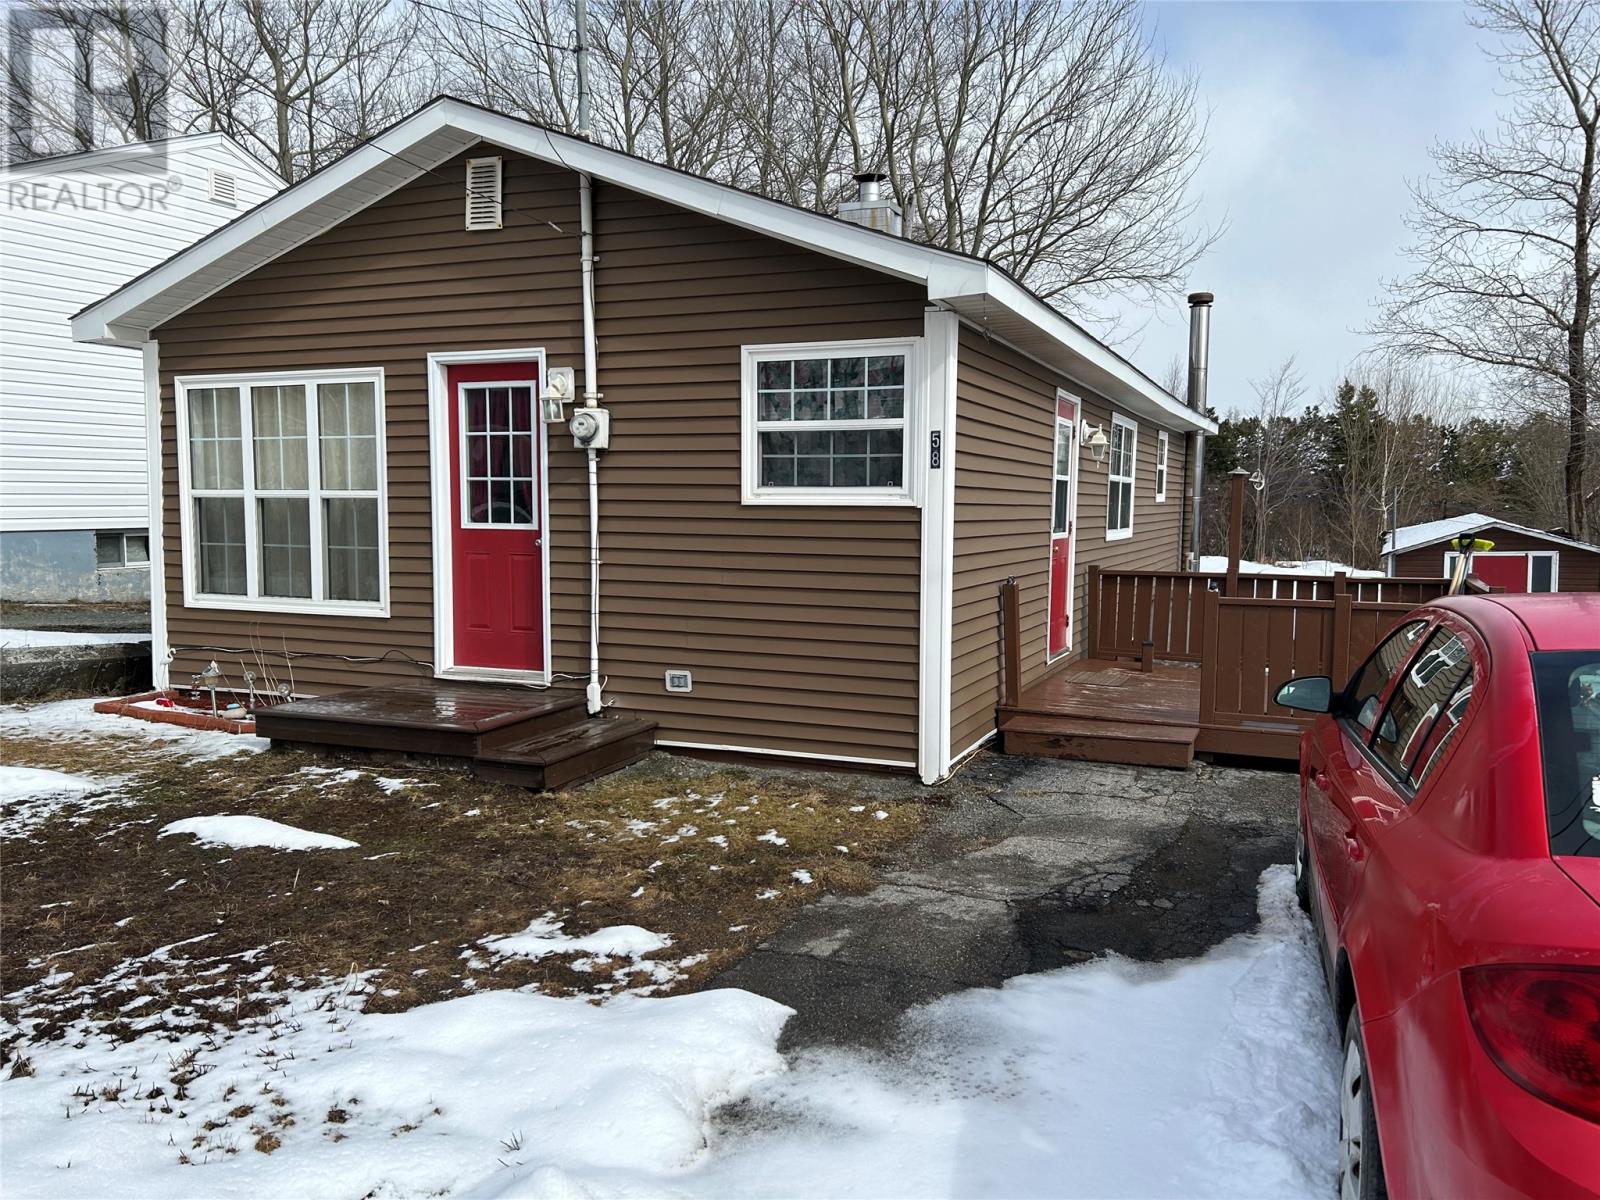 3 Bedroom Residential Home For Sale | 58 Premier Drive | Lewisporte | A0G3A0